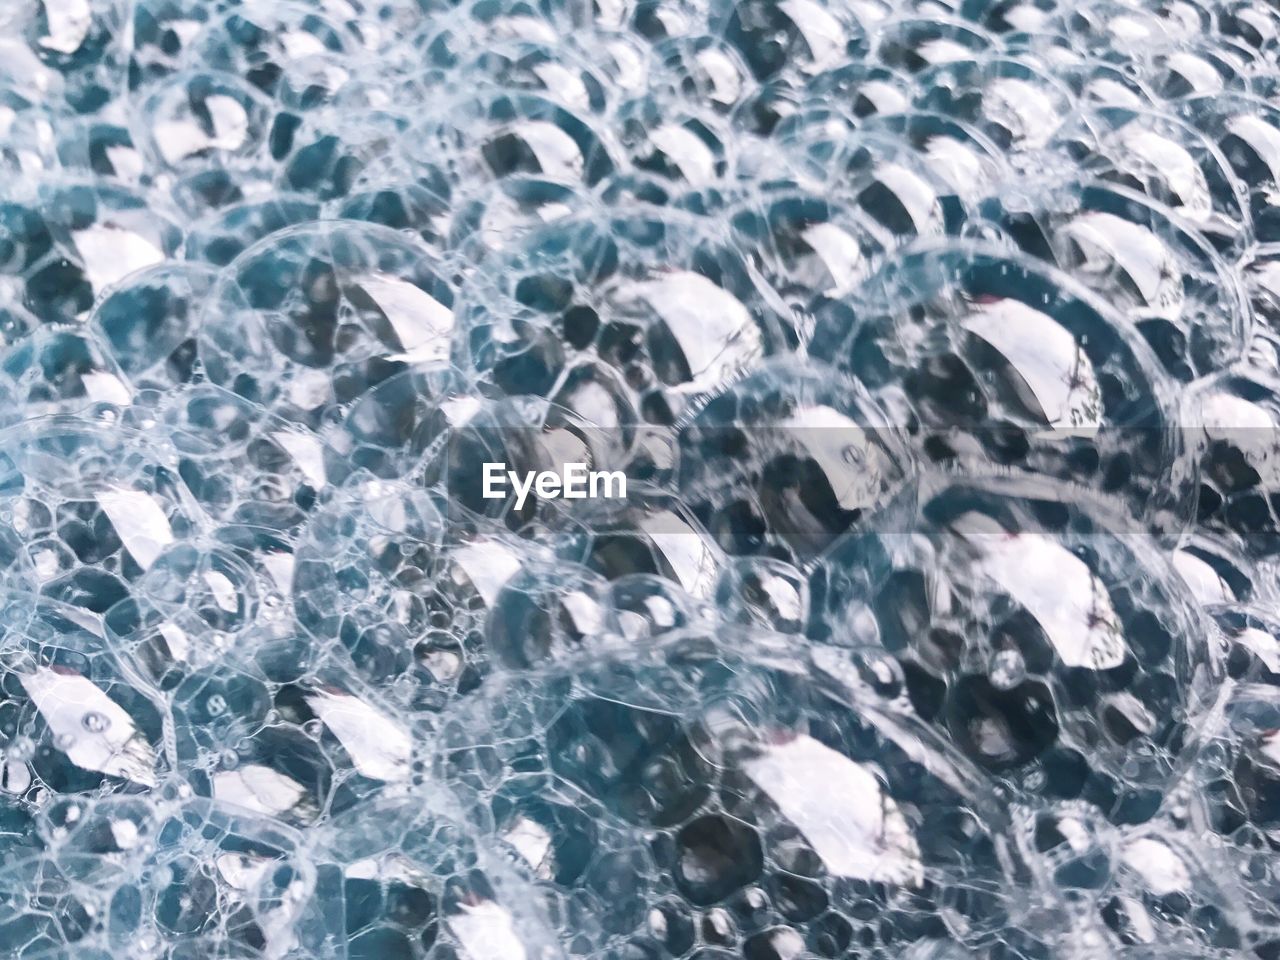 FULL FRAME SHOT OF SWIMMING POOL WITH ICE